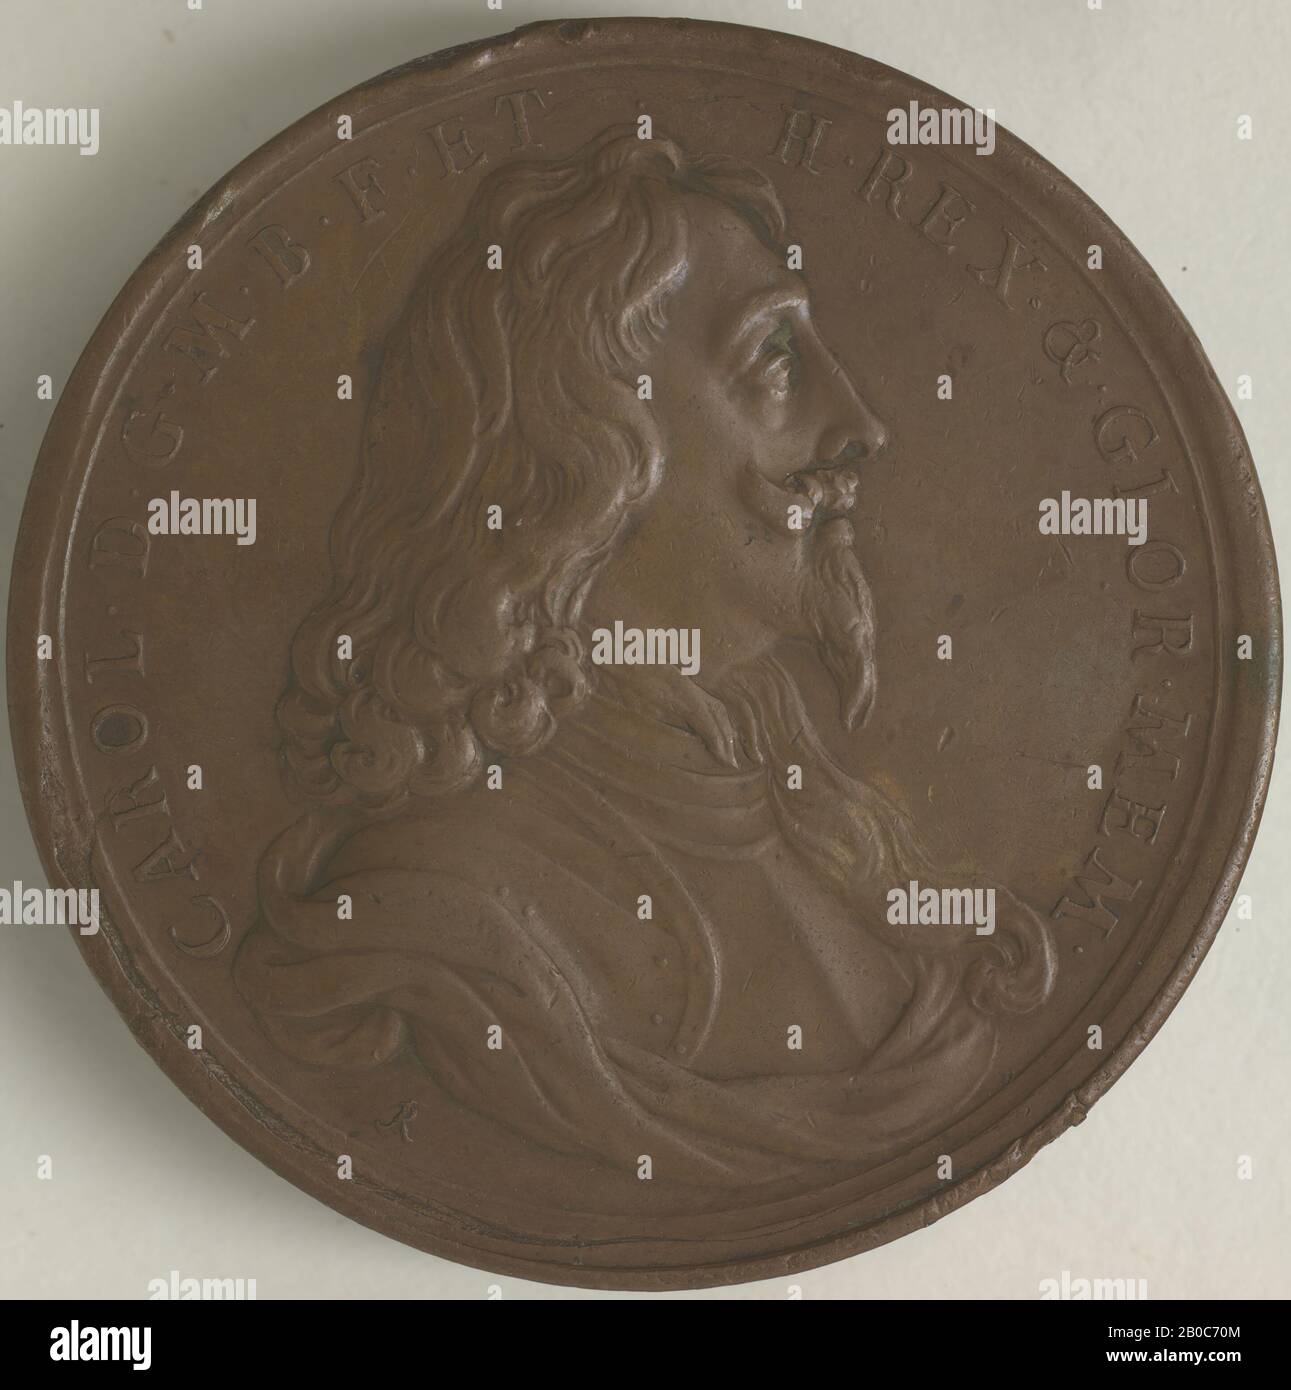 Jean Roettiers, Charles I (1600-1649), King of England 1625-1649, ca. 1670, copper, 1 15/16 in. (5 cm.), Charles I's deep distrust of and frequent clashes with Parliament characterized his reign (1600-1649). The disagreements culminated in the English Civil War, which lasted from 1642 until Charles I's surrender and execution in 1649. After a decade of unsteady Commonwealth rule, Parliament eventually restored Charles I's rightful heir, Charles II, to the throne in 1660. Charles II ordered this posthumous medal of Charles I to be struck in honor of his father. Ironically, the reverse of the me Stock Photo